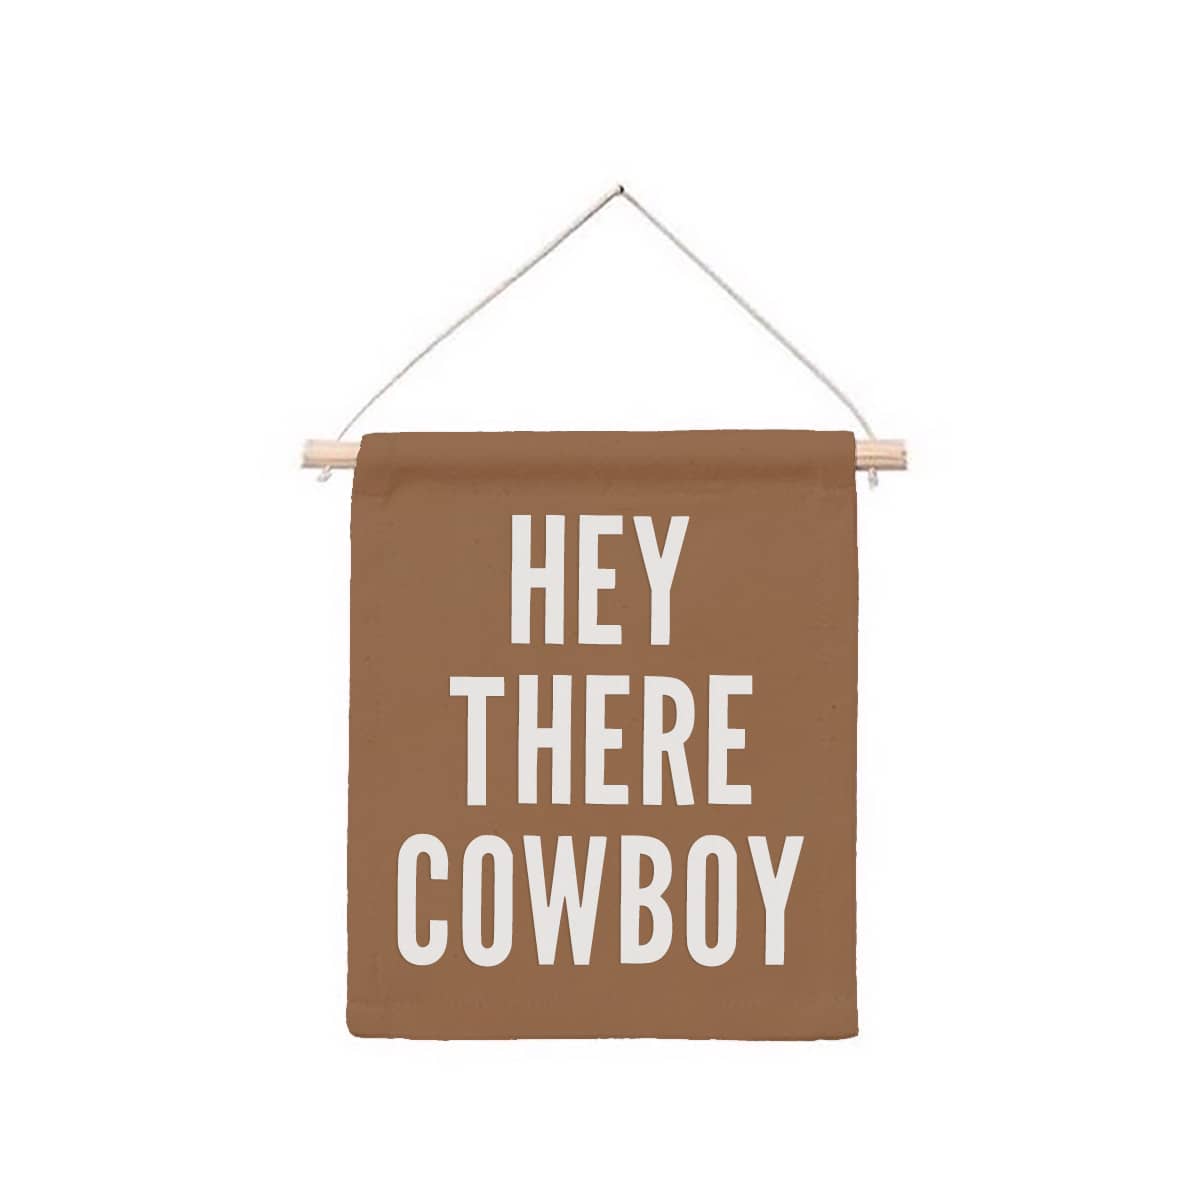 Hey There Cowboy Hanging Canvas Banner